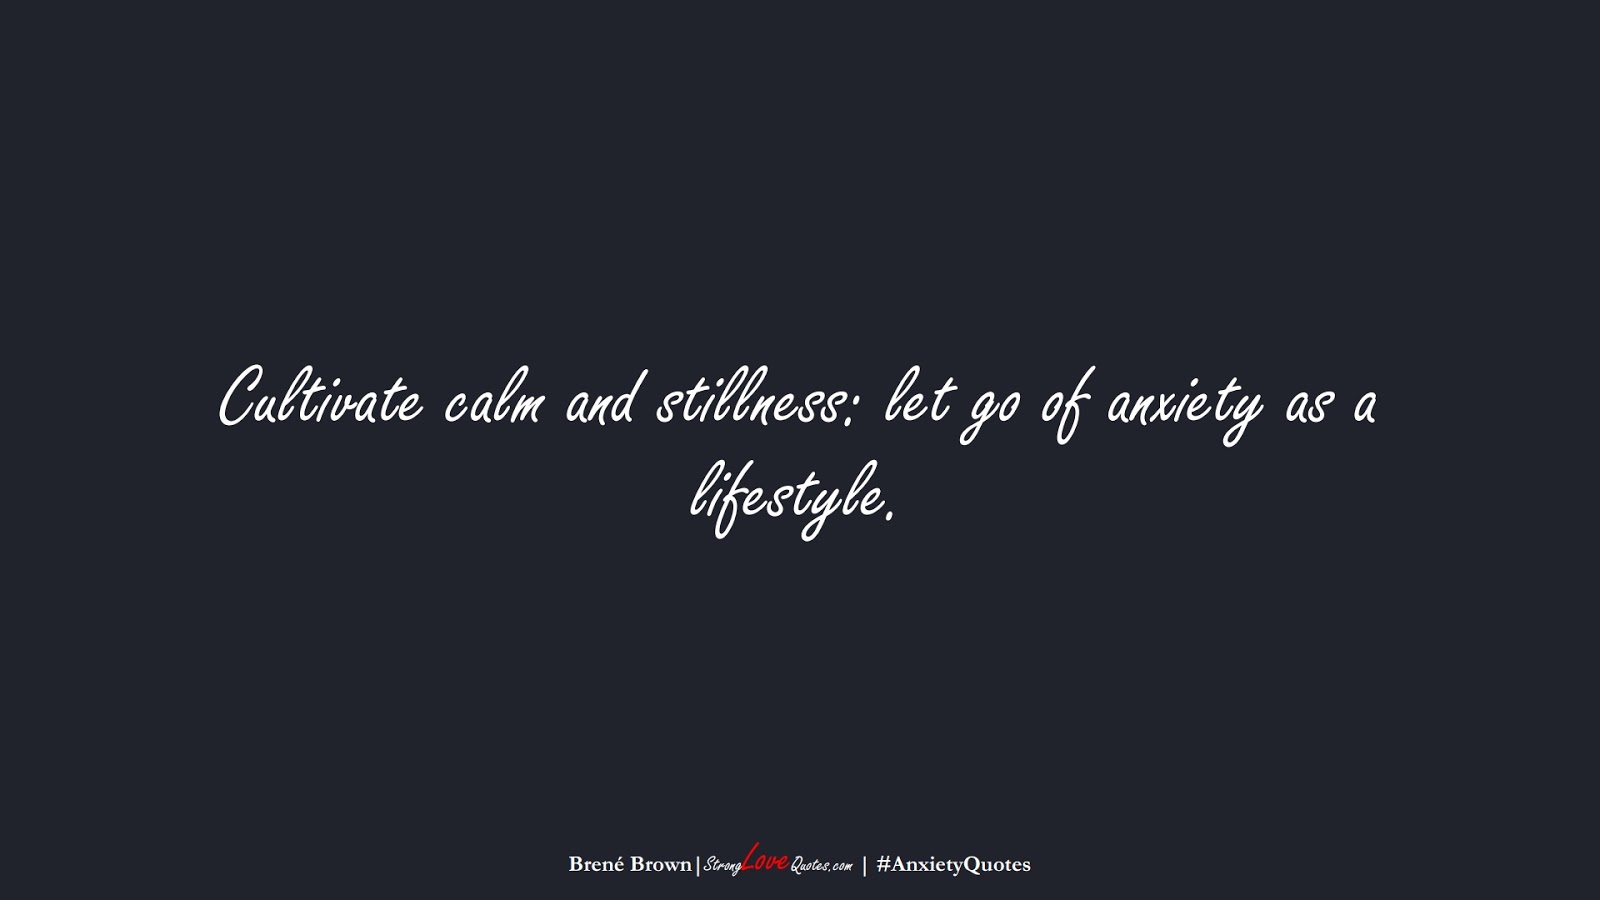 Cultivate calm and stillness: let go of anxiety as a lifestyle. (Brené Brown);  #AnxietyQuotes